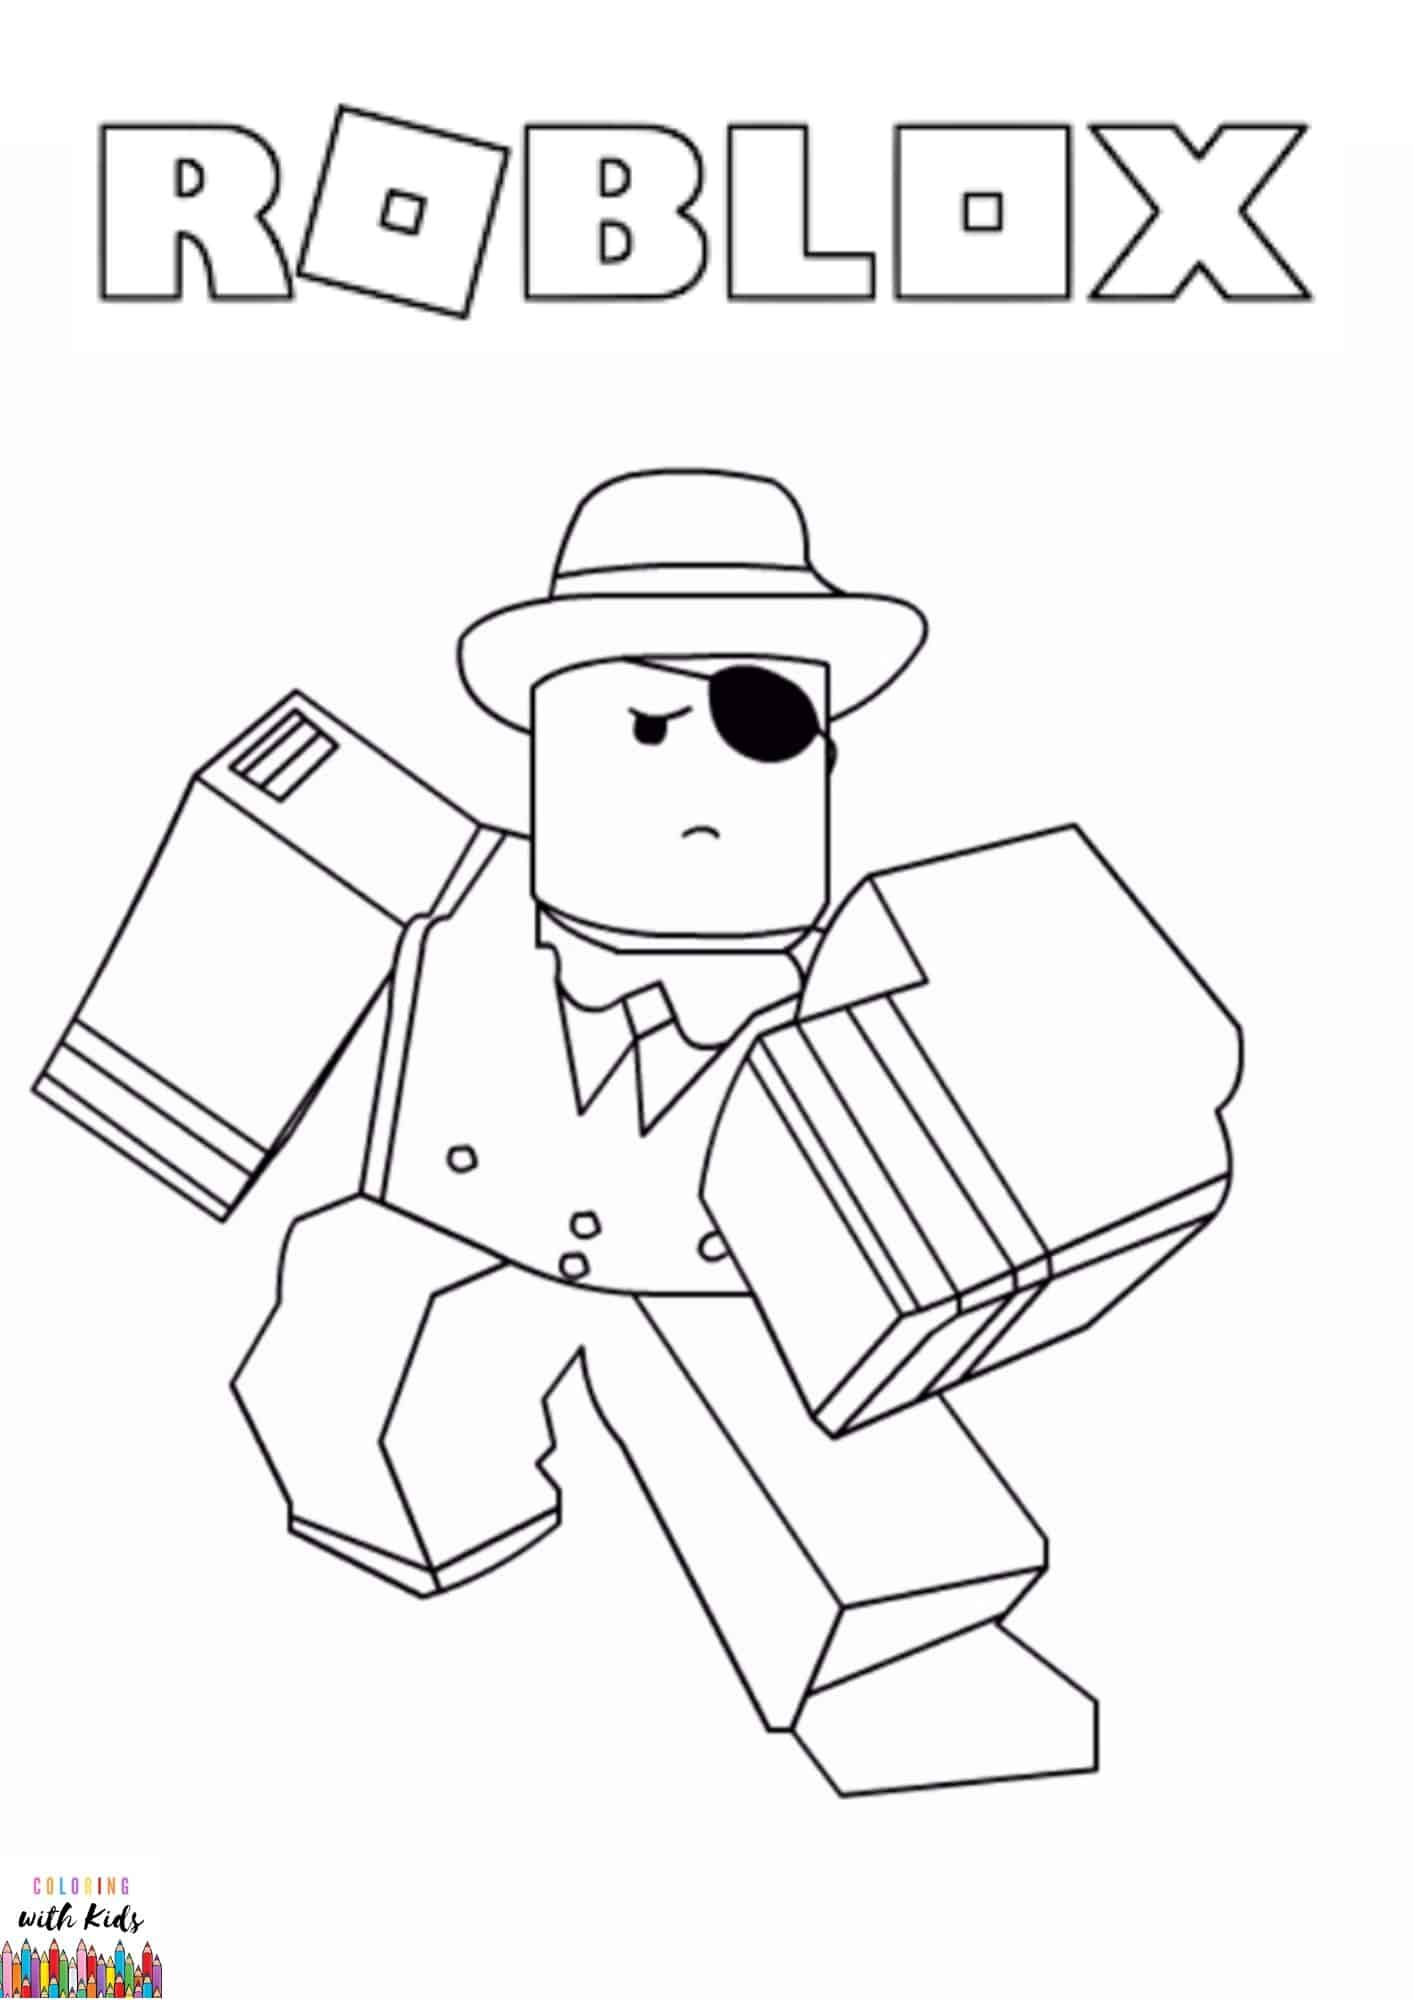 Roblox Coloring Page | coloringwithkids.com